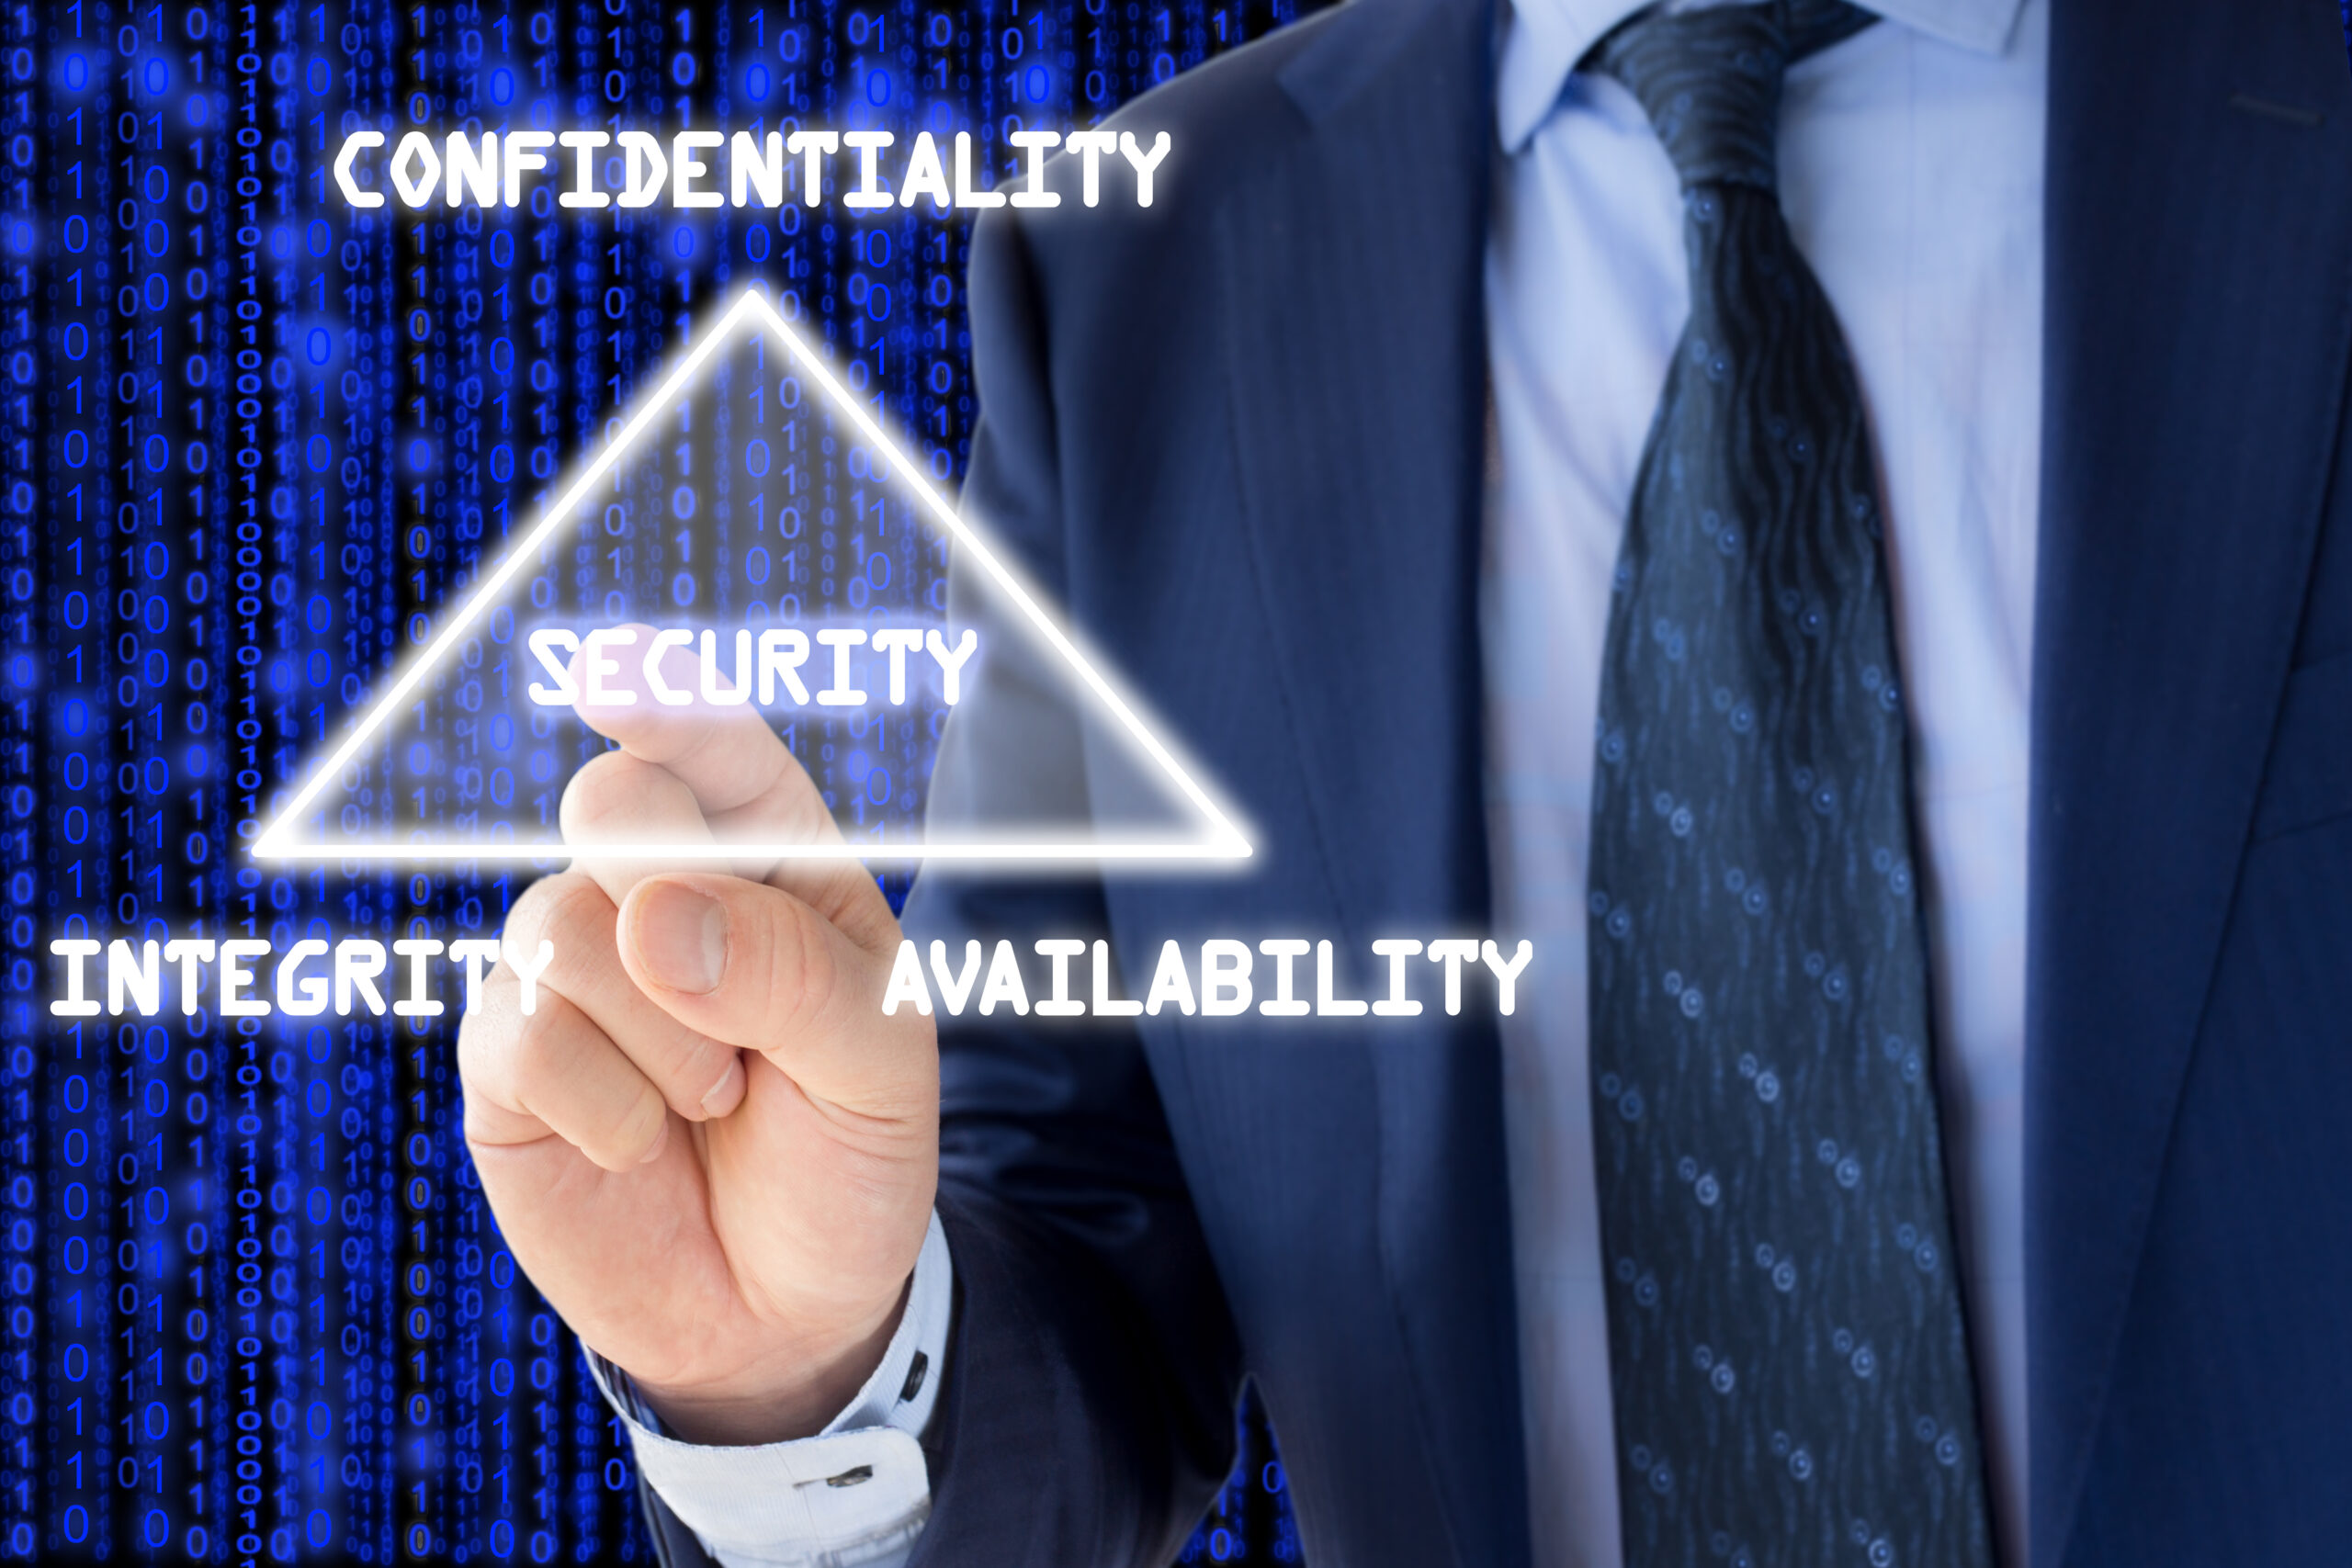 The basic concept of information security the CIA triangle illustrated by an IT expert on blue. A white person in a navy suit is in front of a blue stylized background with an overlay that the person is pointing to of a white glowing triangle with the text "security" inside the triangle and the words "confidentiality", "integrity", and "availability" on the points.